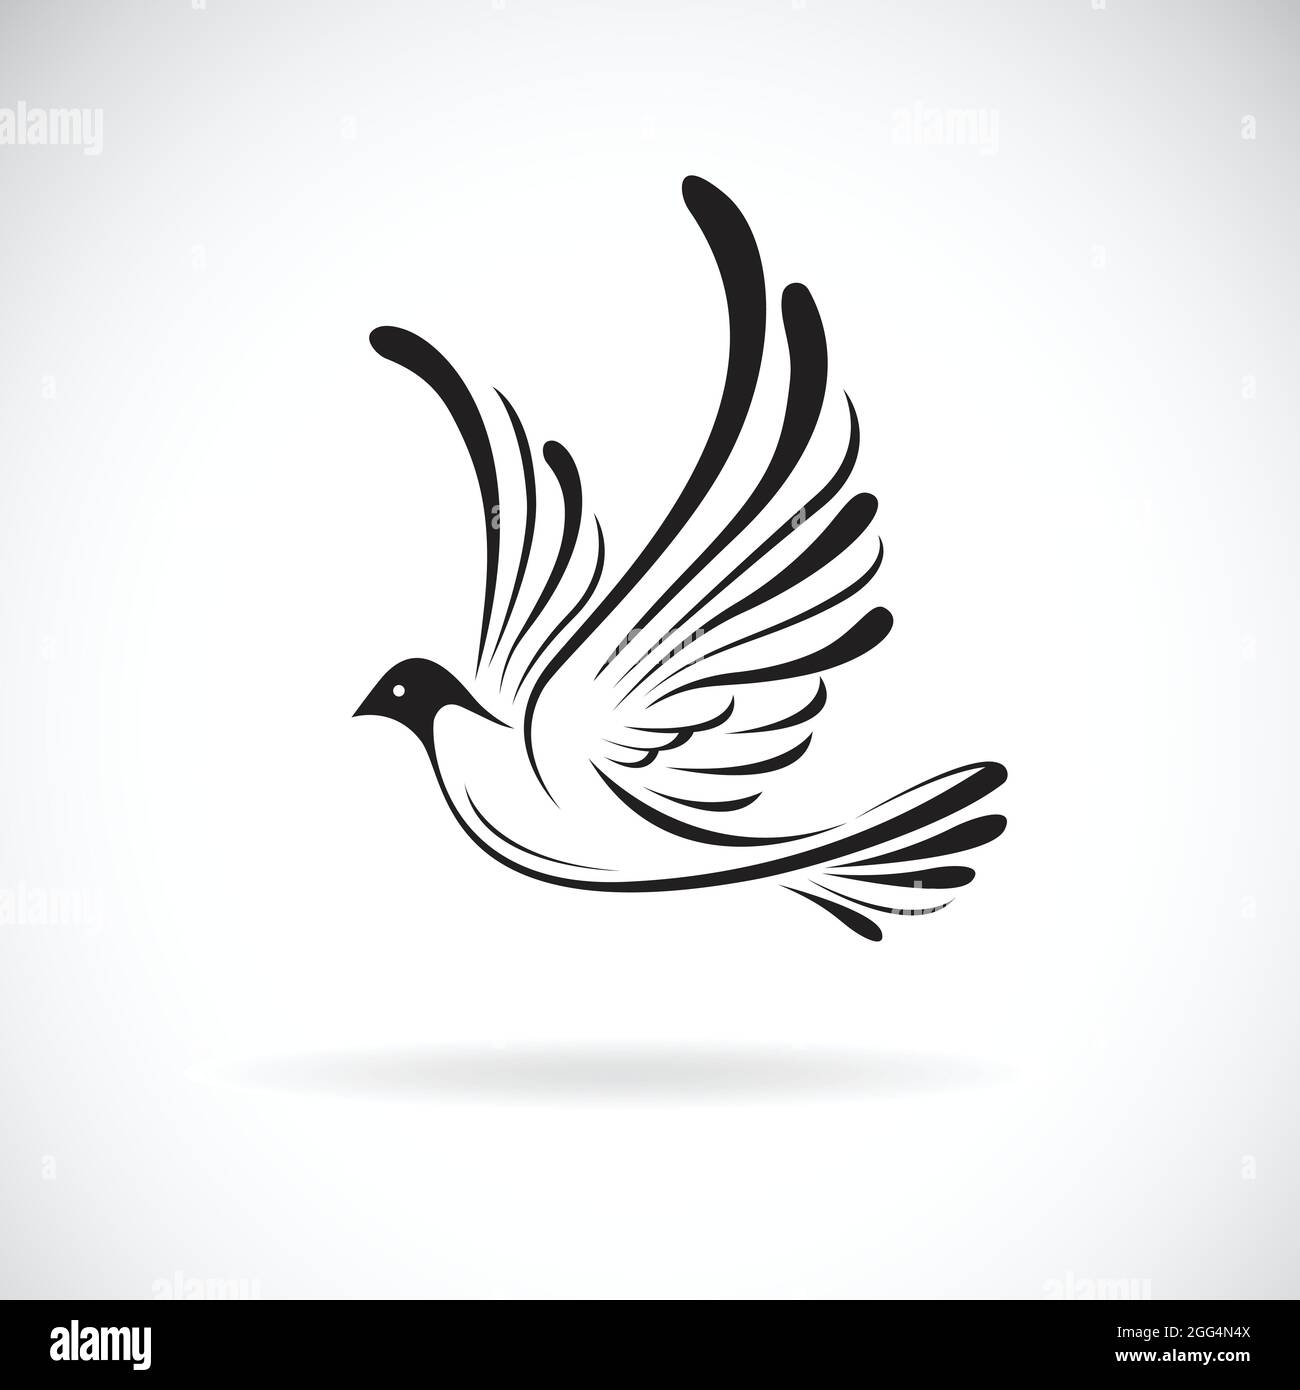 A guide on best of the dove tattoos ideas  Tattoolicom